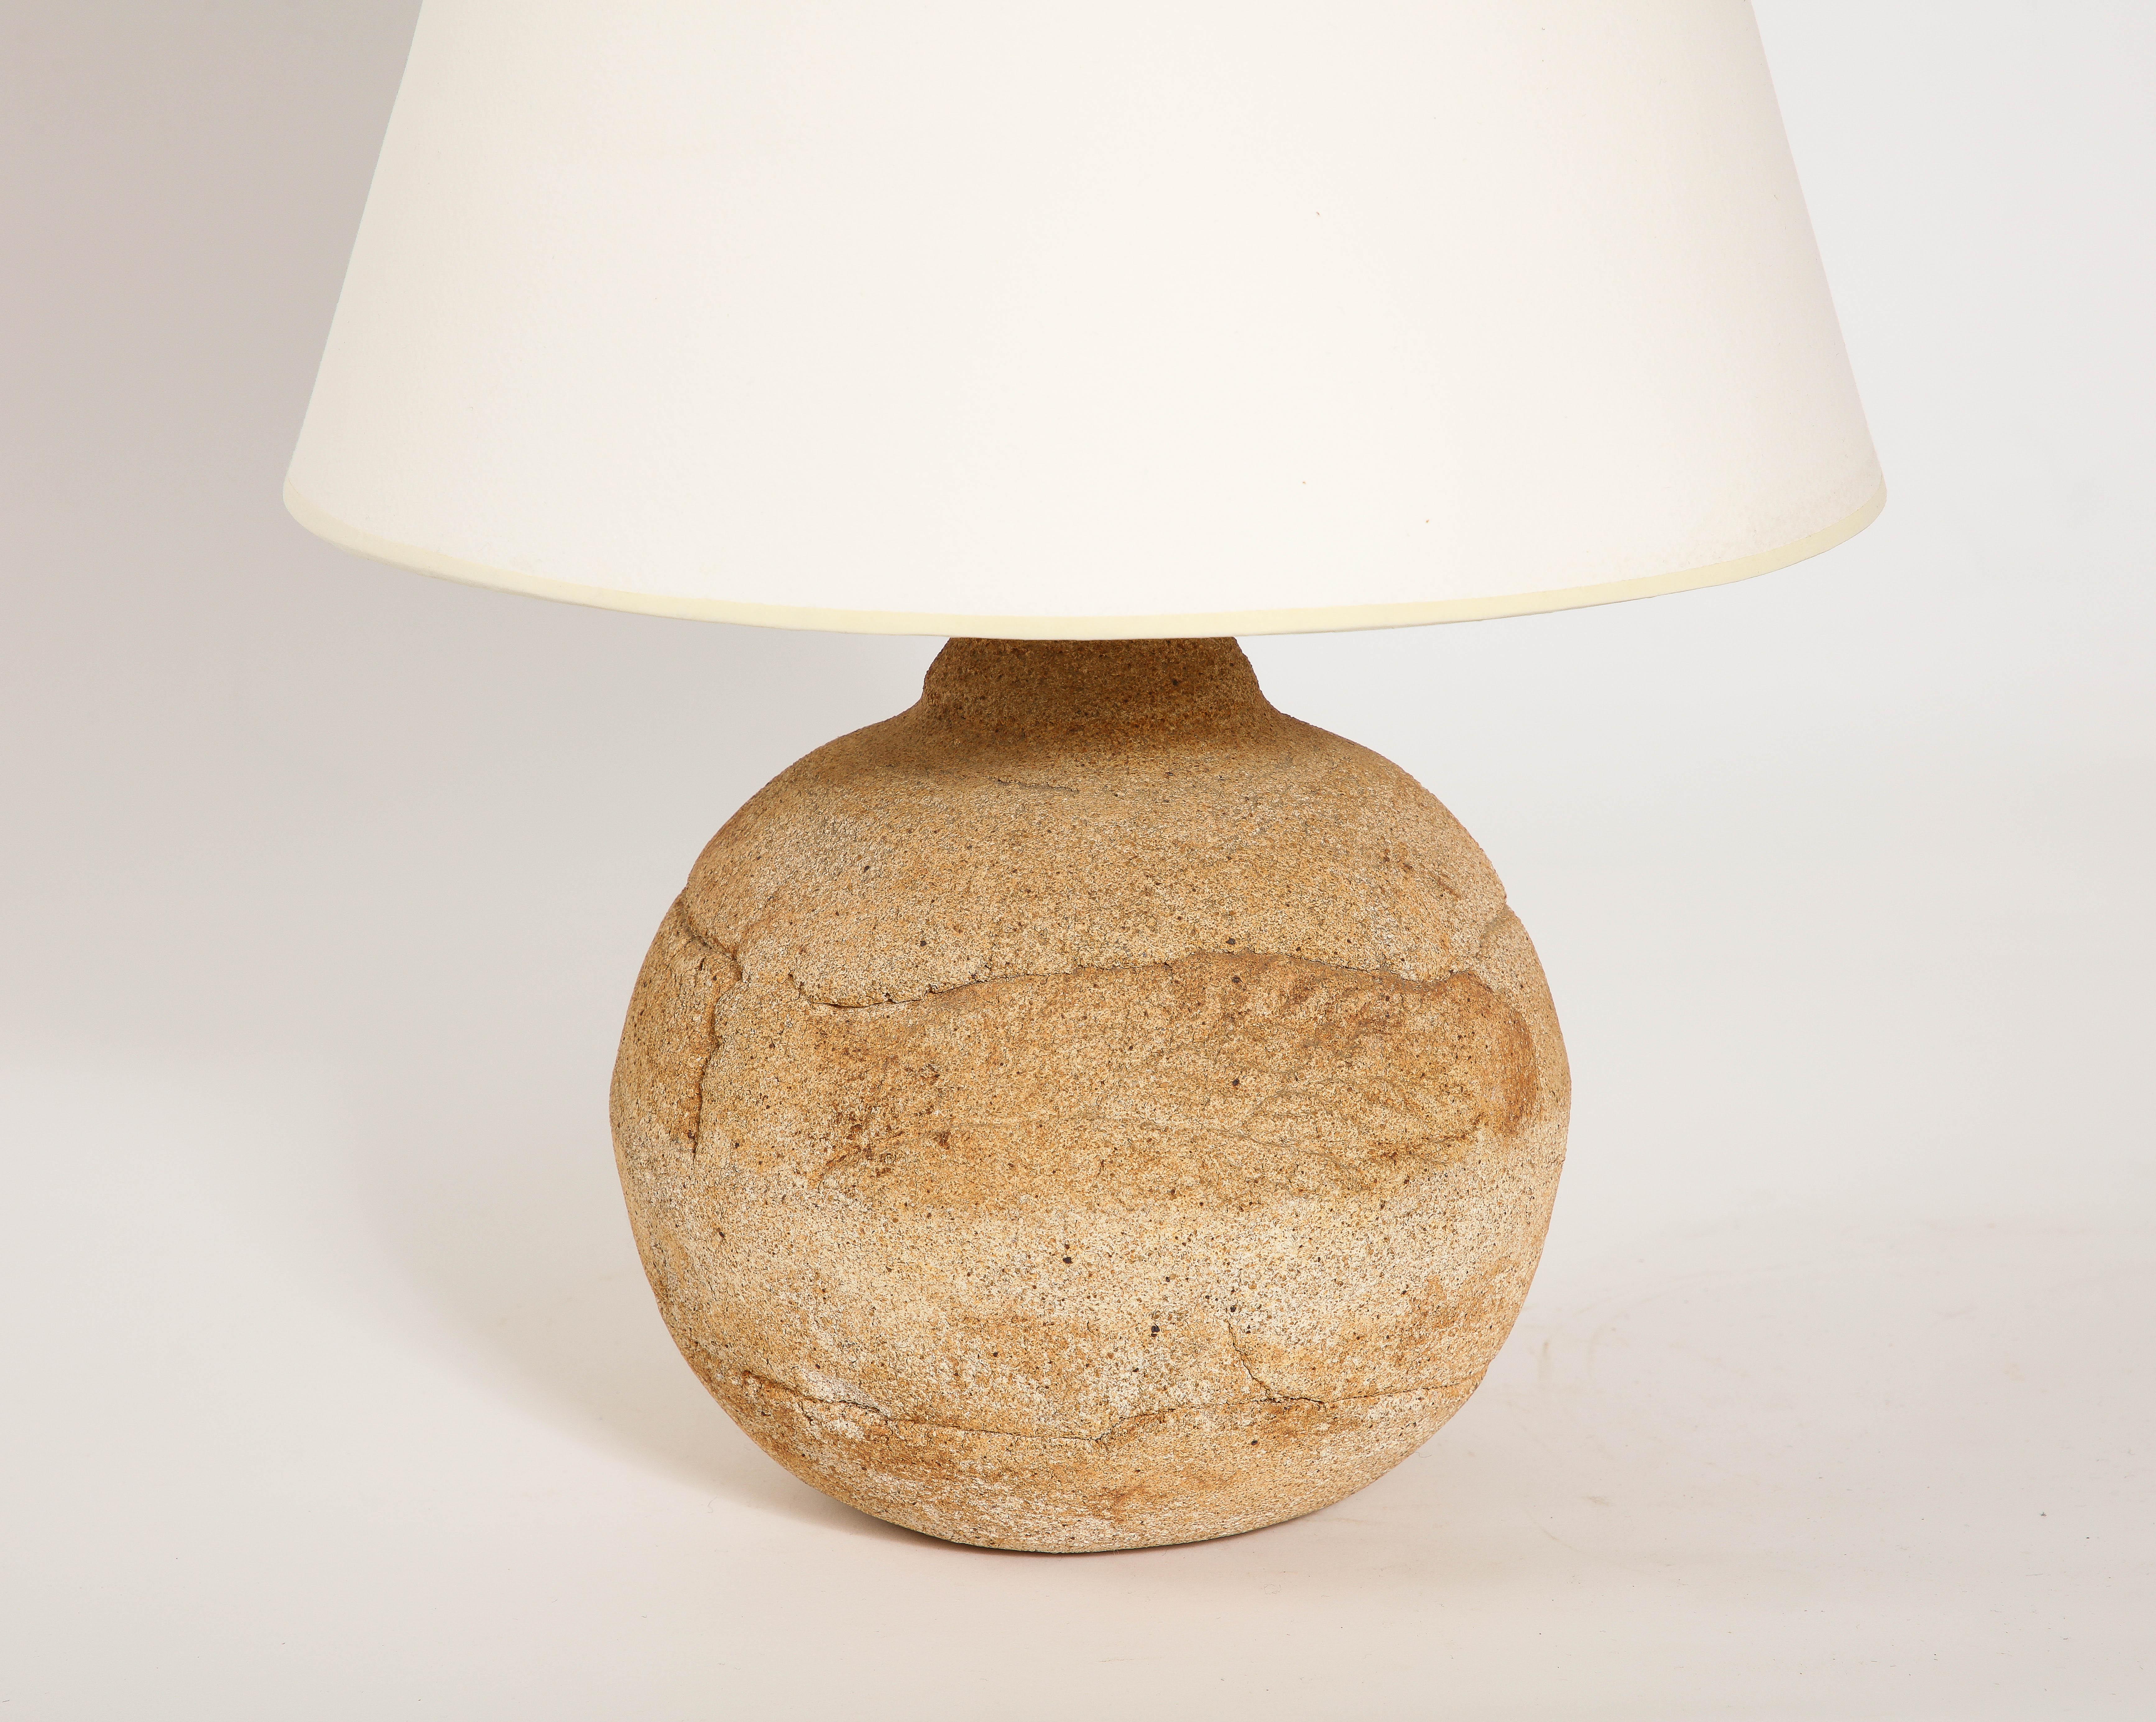 Layered Earthenware Table Lamp, France 1960's For Sale 2